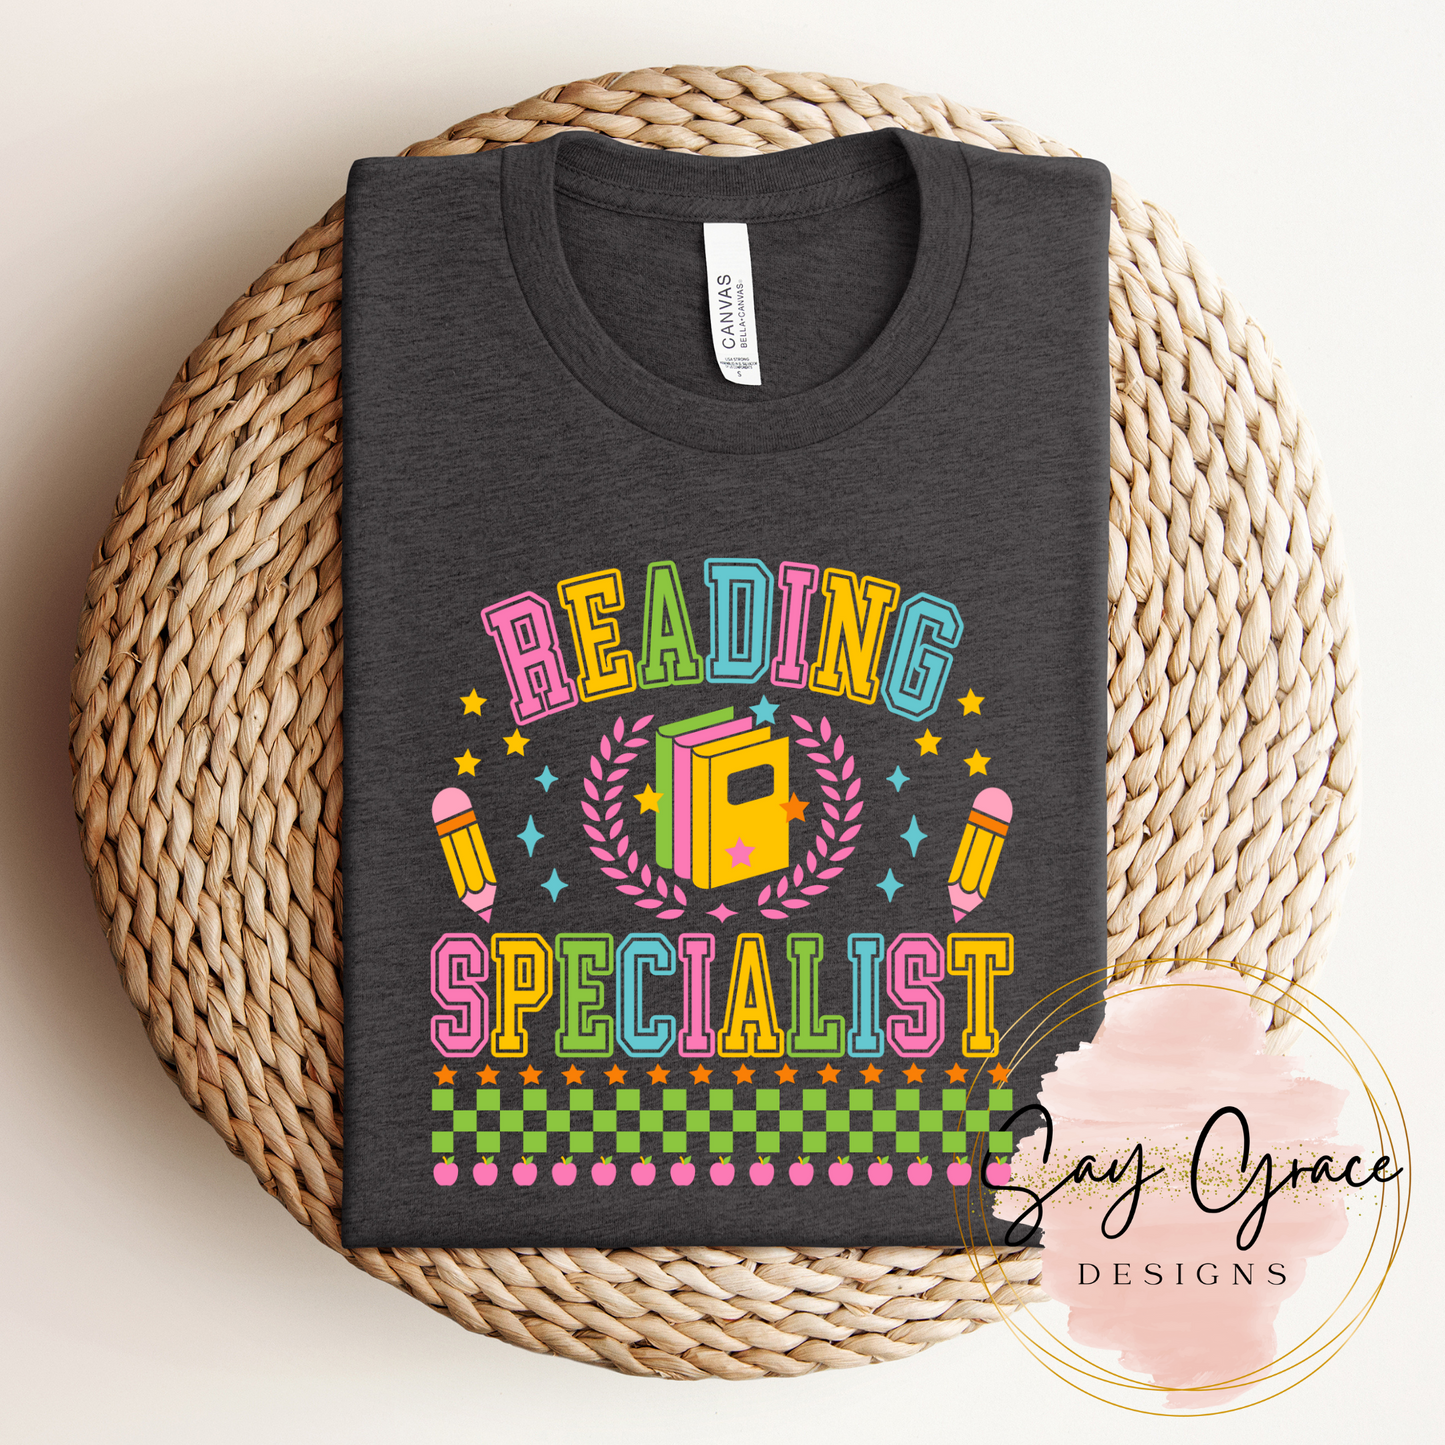 Reading Specialist Checkered